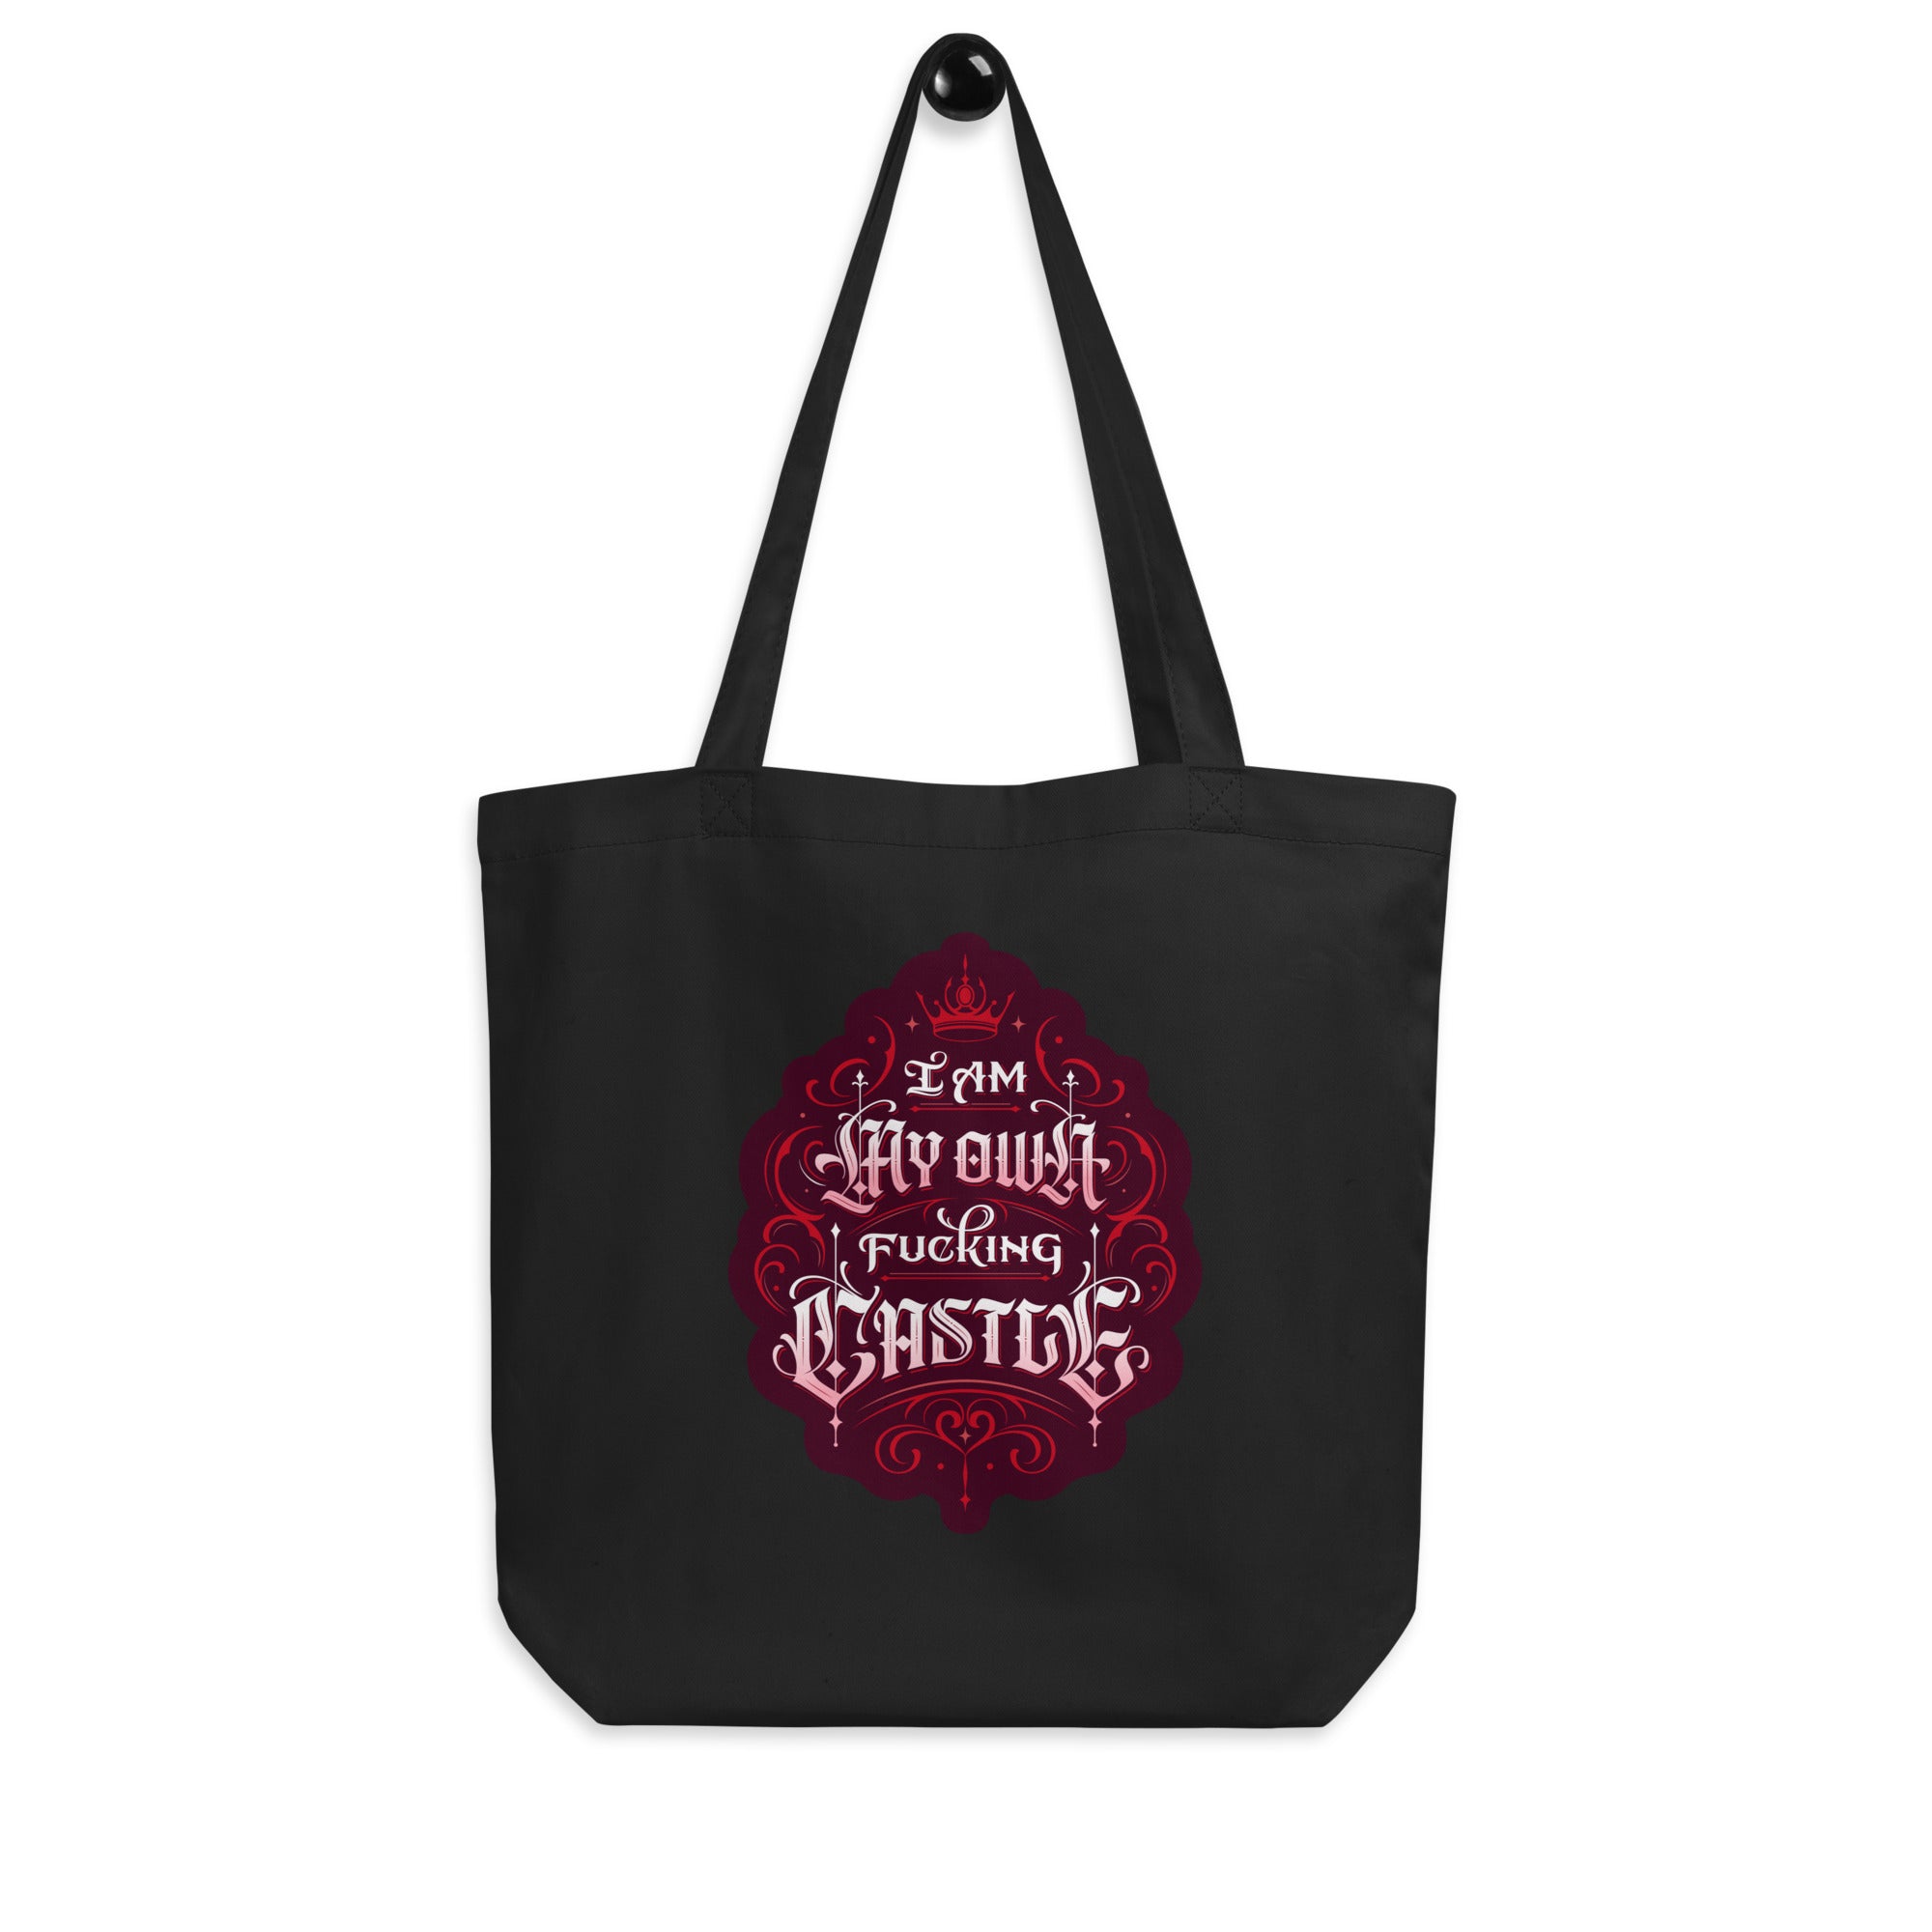 "I am my own fucking castle" eco tote bag